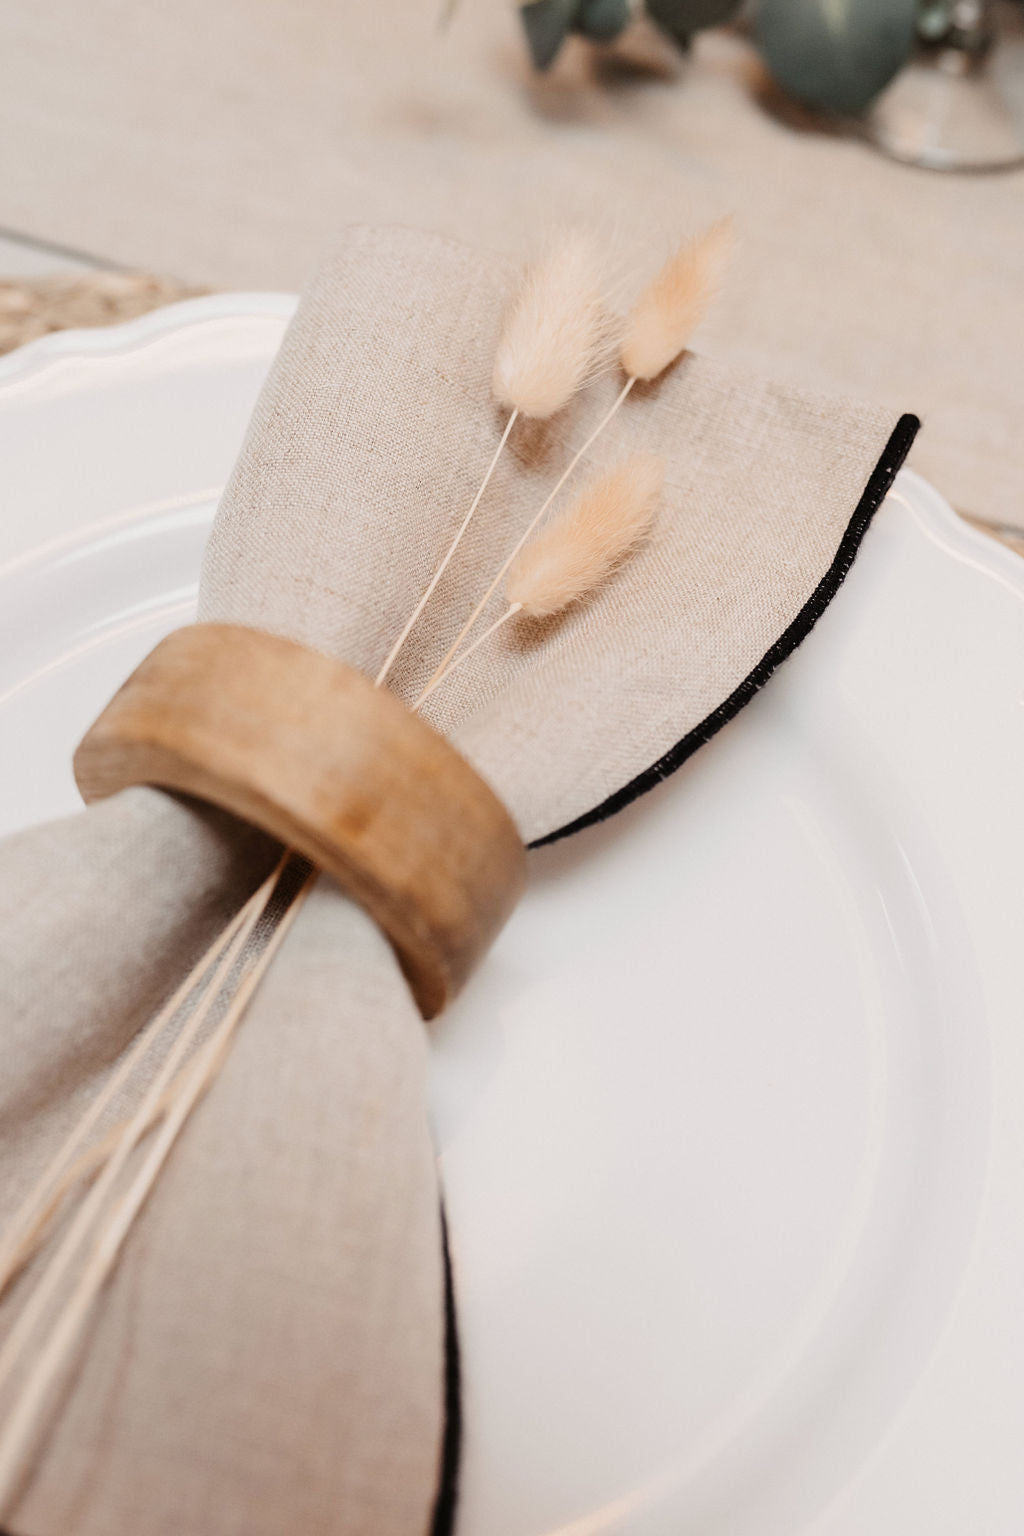 PIPED LINEN NAPKINS